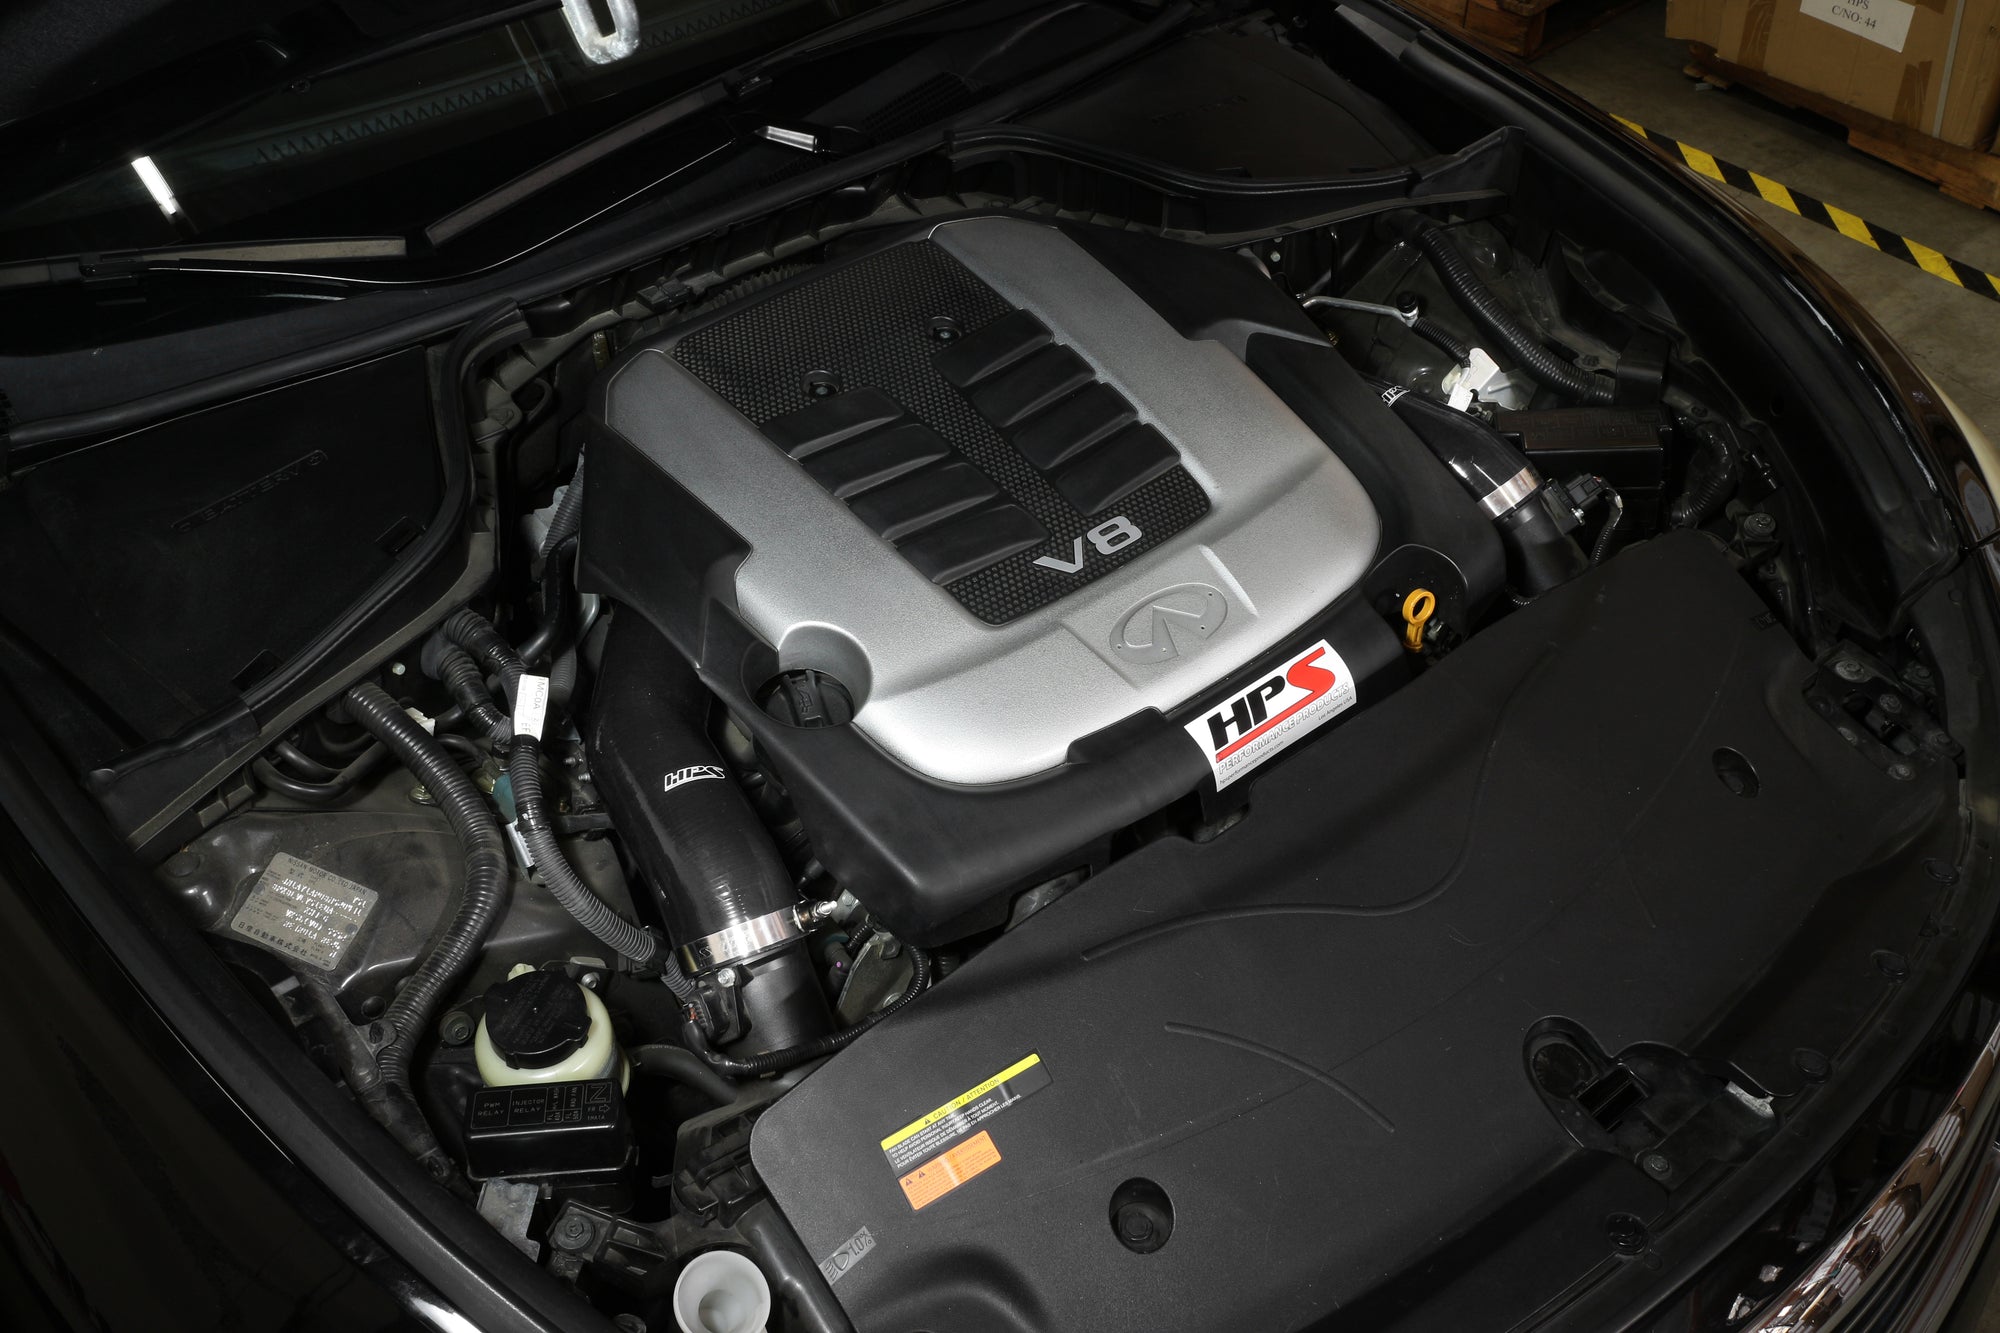 HPS Black Silicone Post MAF Cold Air Intake Hose Kit Infiniti 11-13 M56 5.6L V8 Installed, Must have performance upgrade